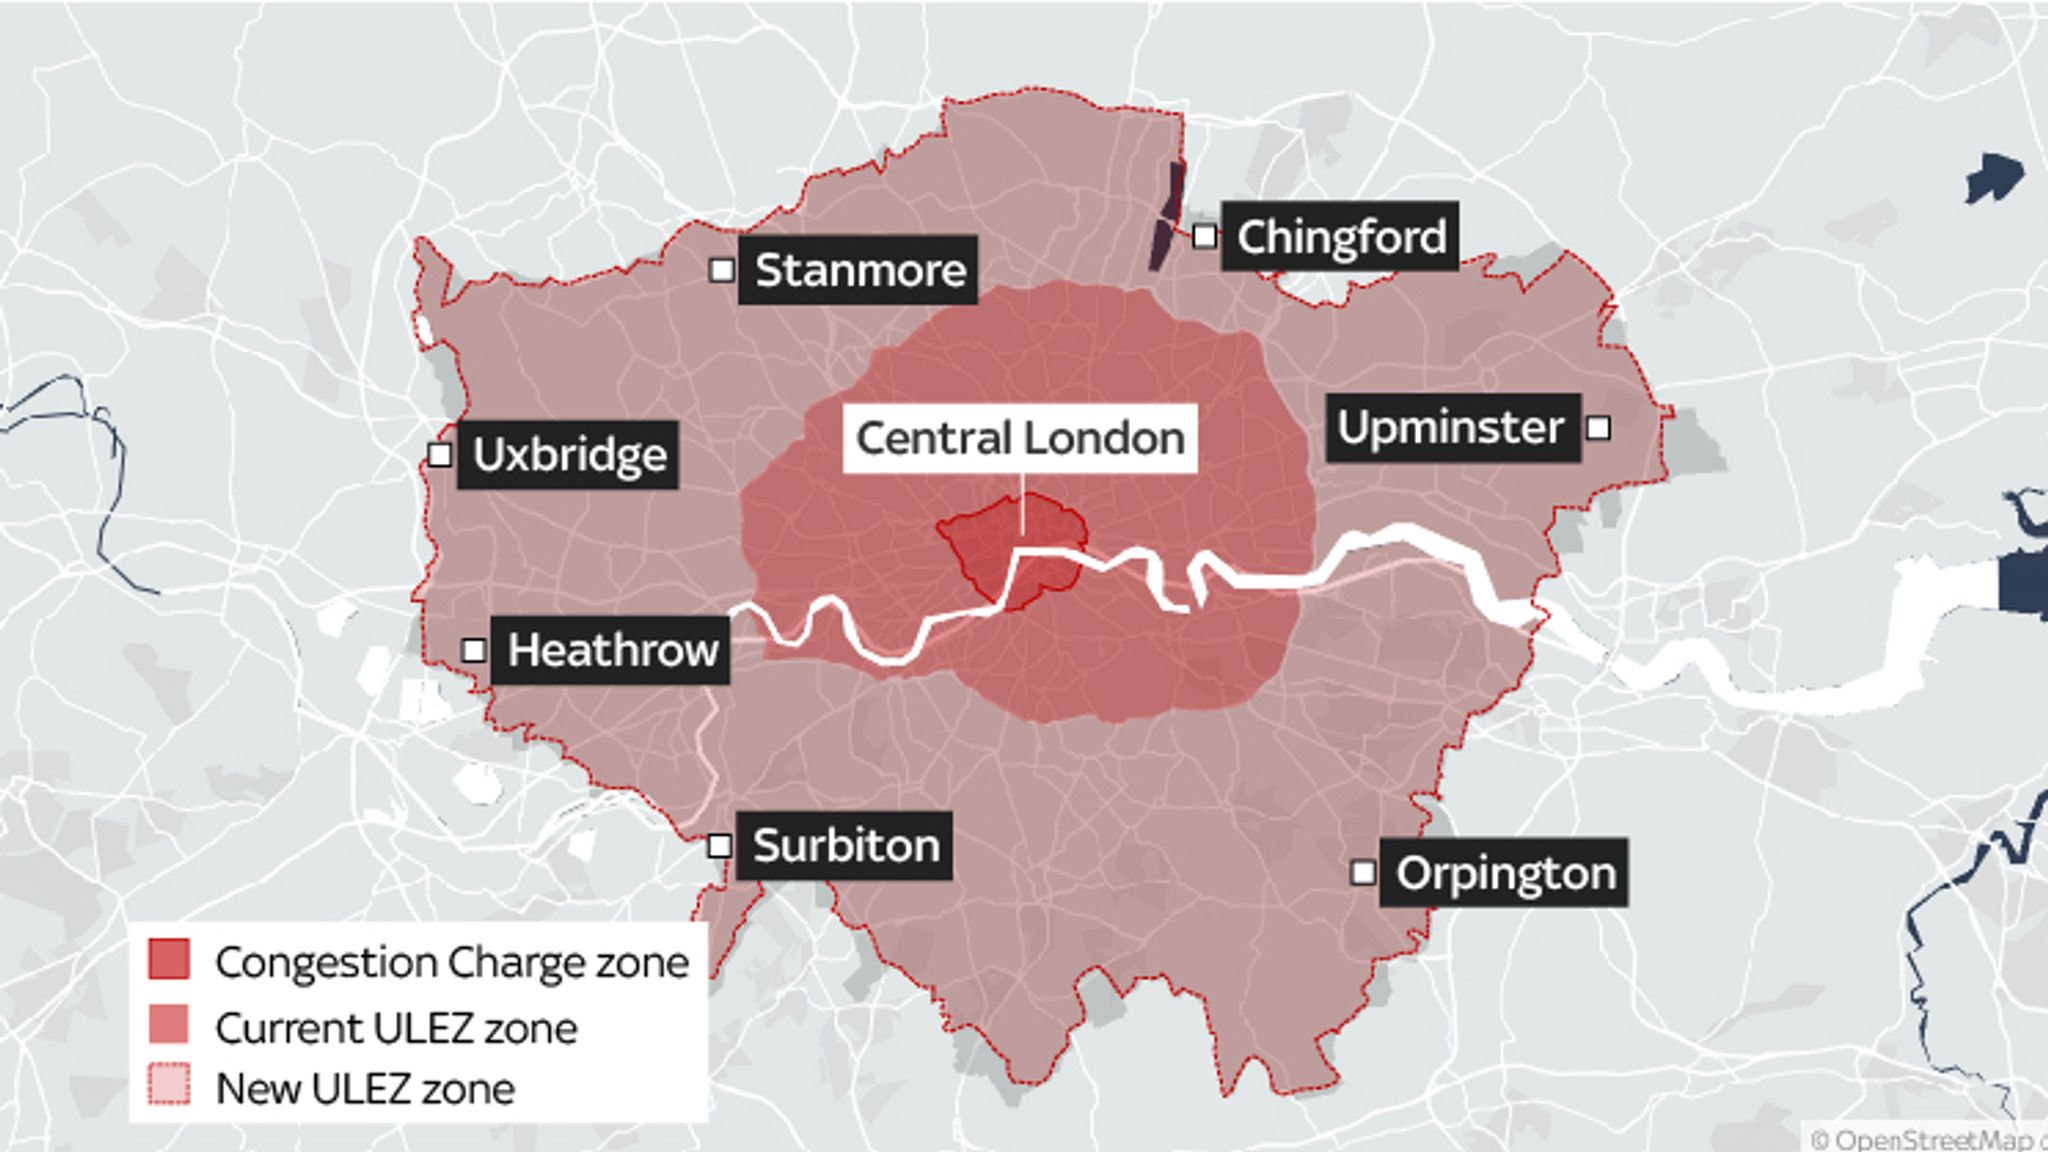 ULEZ slashes air pollution by 46 in central London but critics